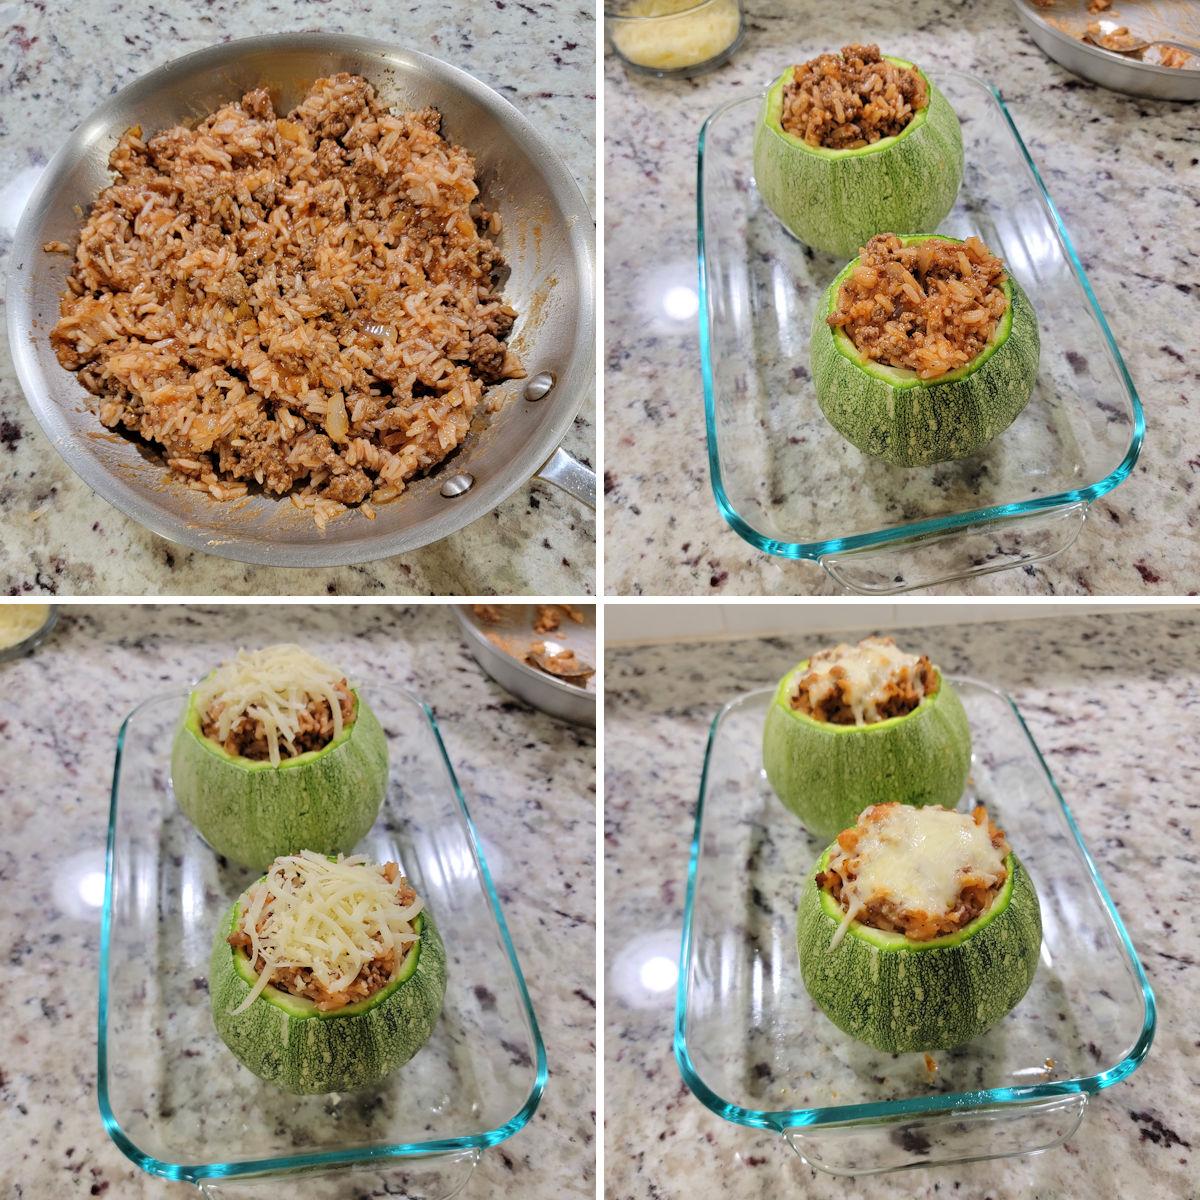 Filling round zucchini with stuffing before baking.